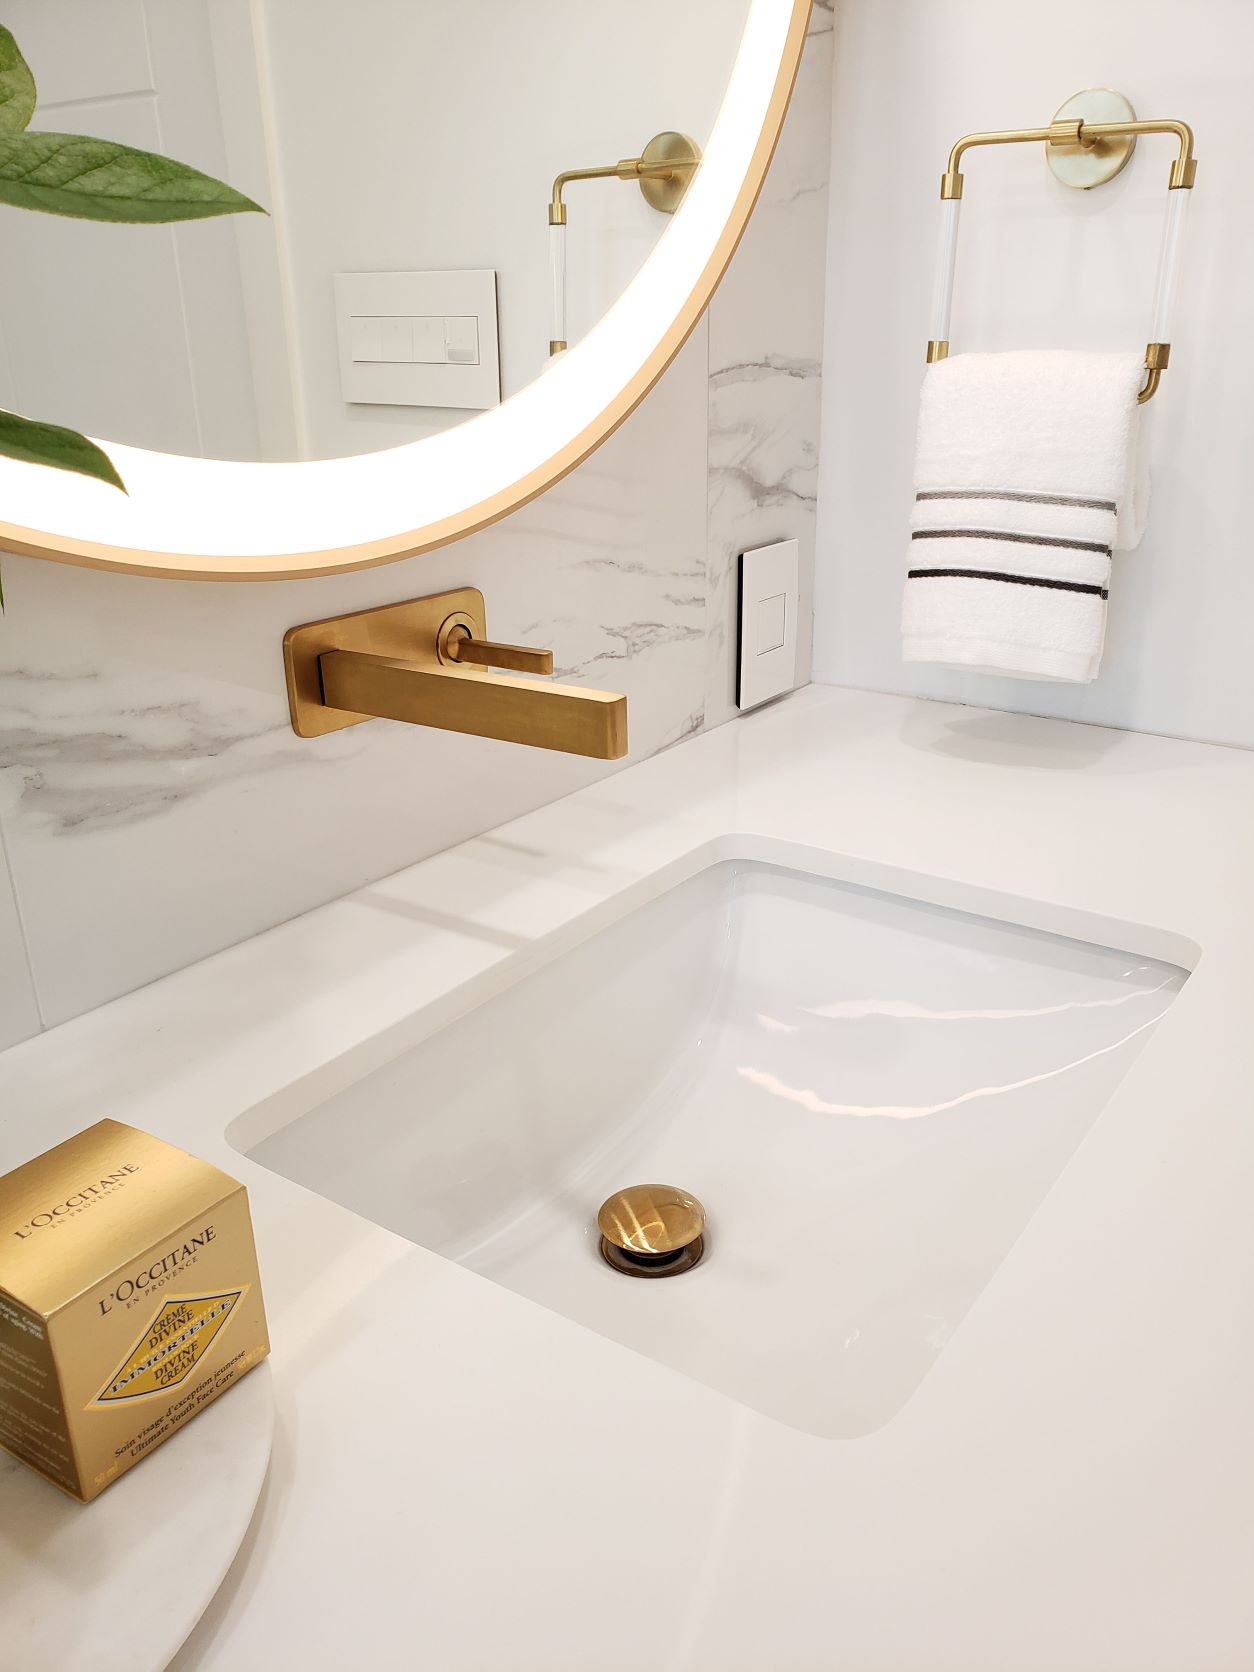 Brass and Lucite Hand Towel Bar adds a touch of elegance